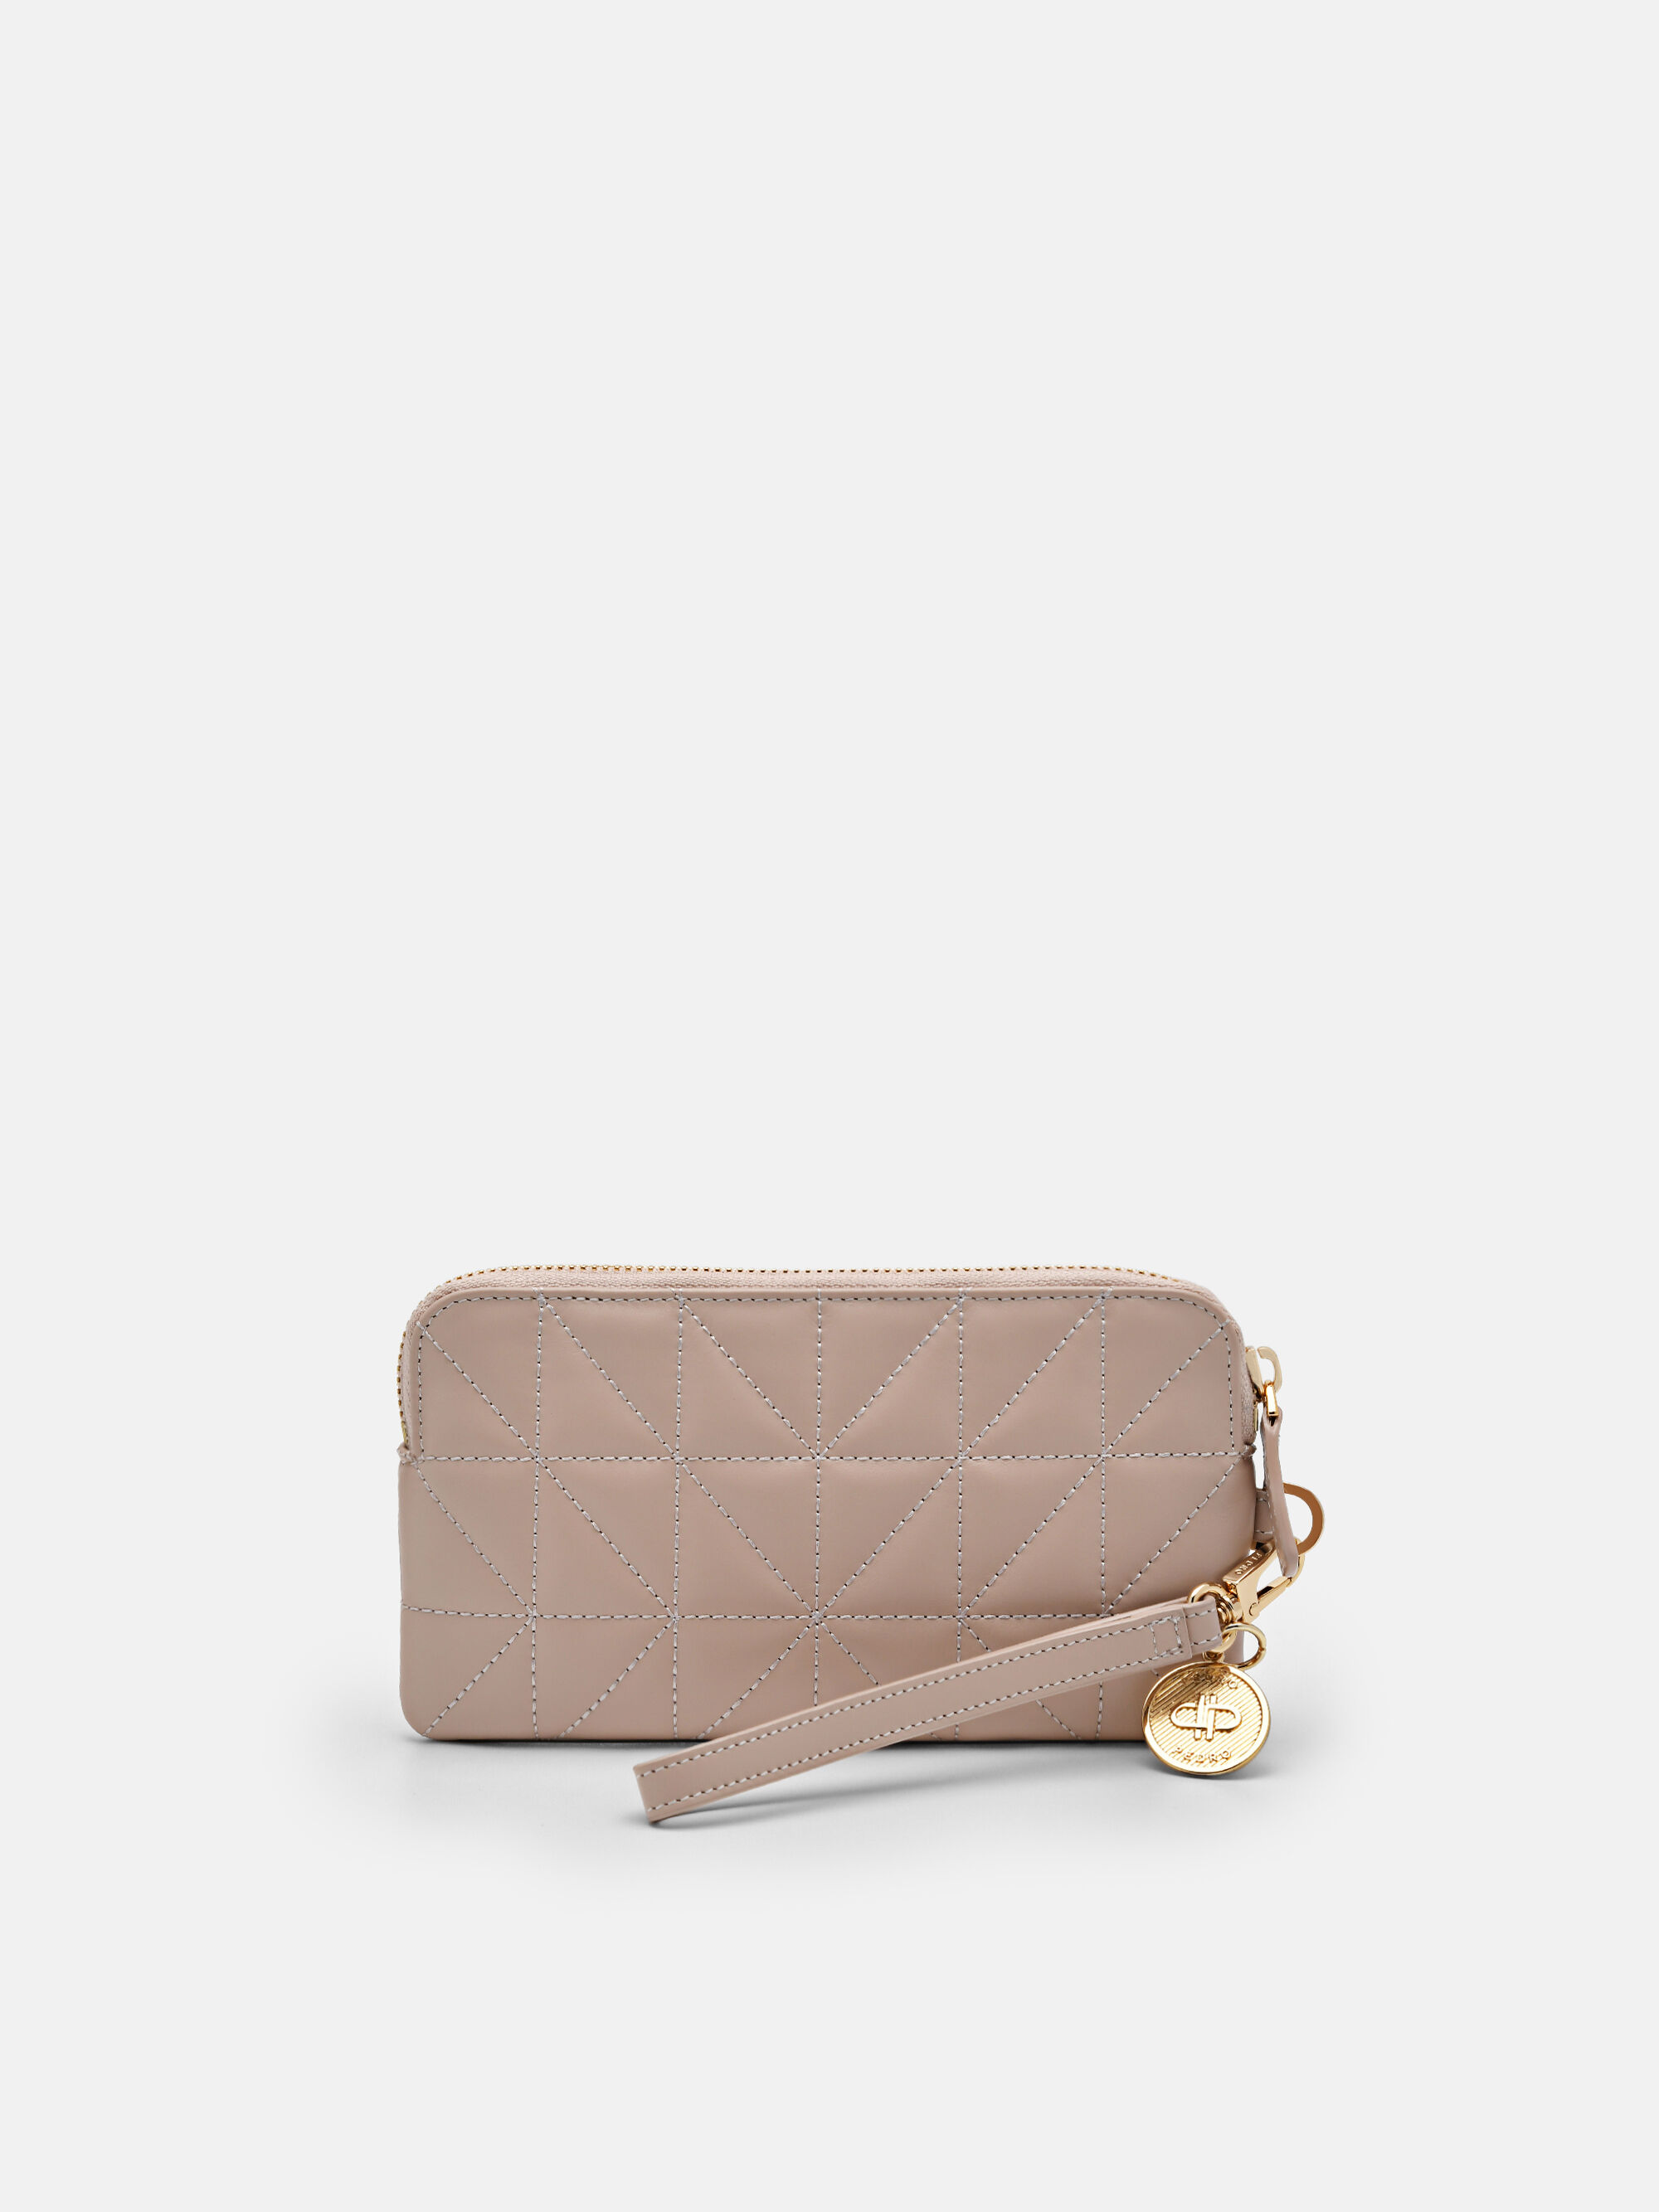 PEDRO Studio Leather Pouch in Pixel, Nude